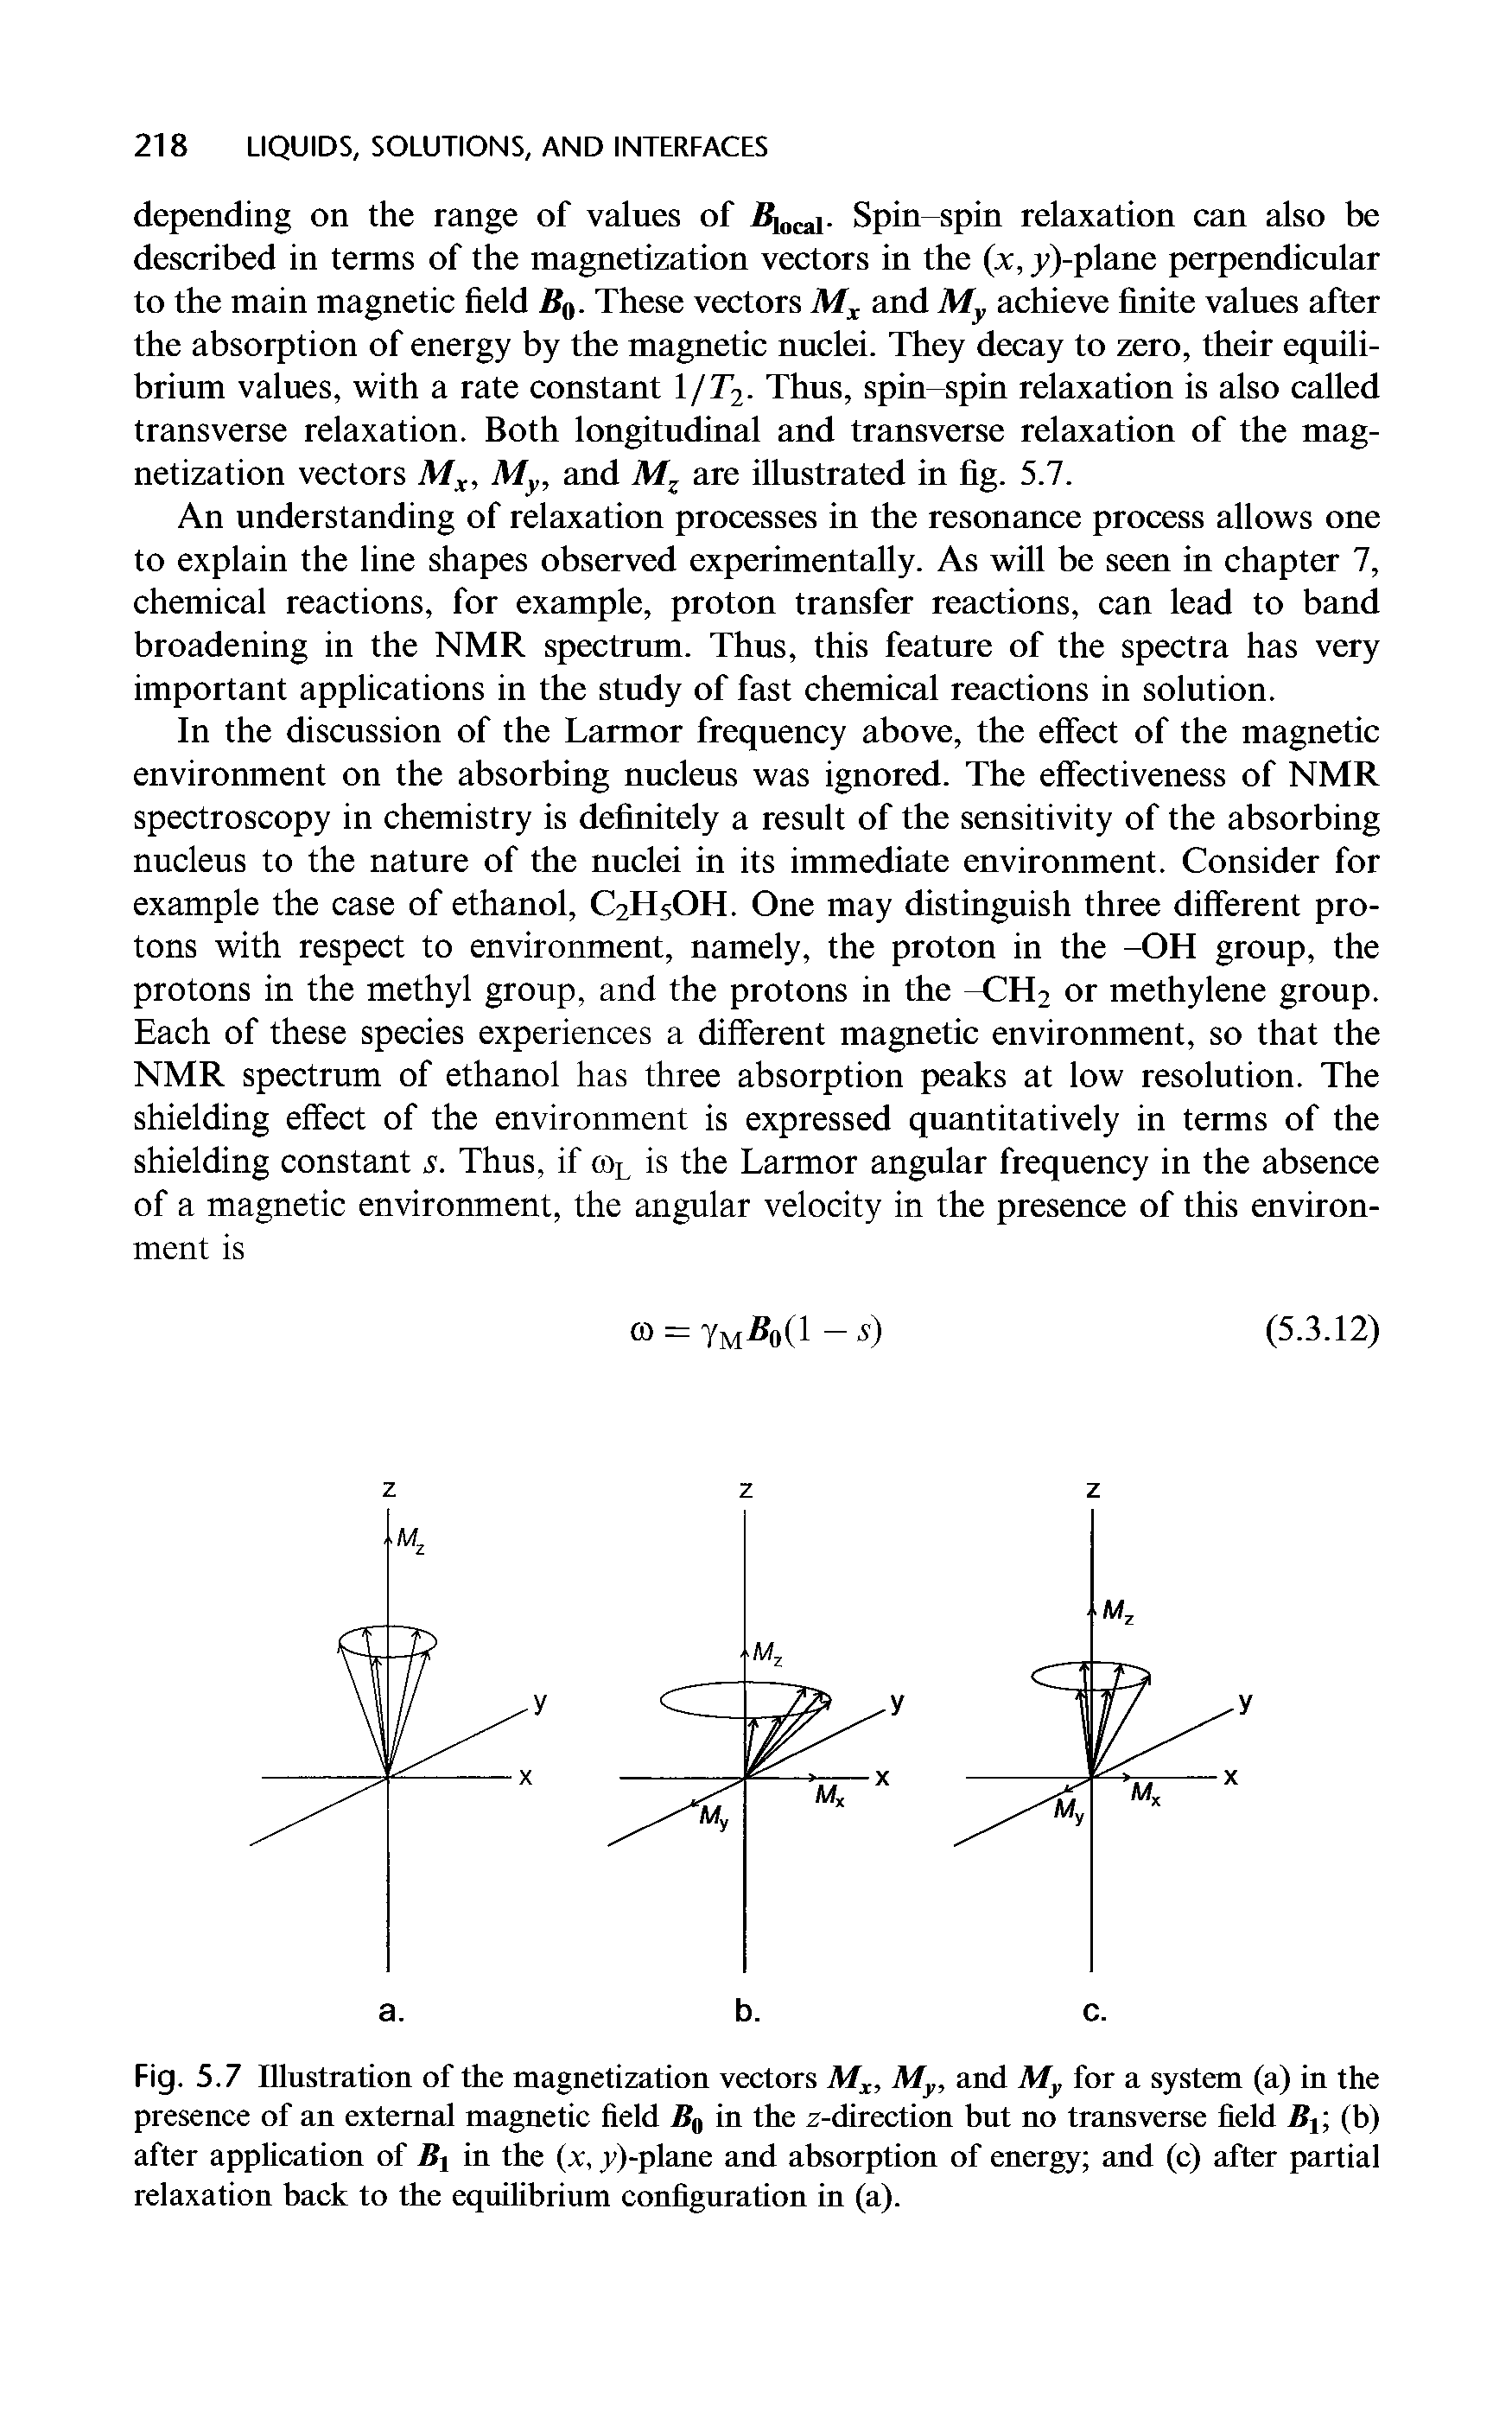 Fig. 5.7 Illustration of the magnetization vectors M., My, and My for a system (a) in the presence of an external magnetic field Bo in the z-direction but no transverse field (b) after application of Bj in the (x, y)-plane and absorption of energy and (c) after partial relaxation back to the equilibrium configuration in (a).